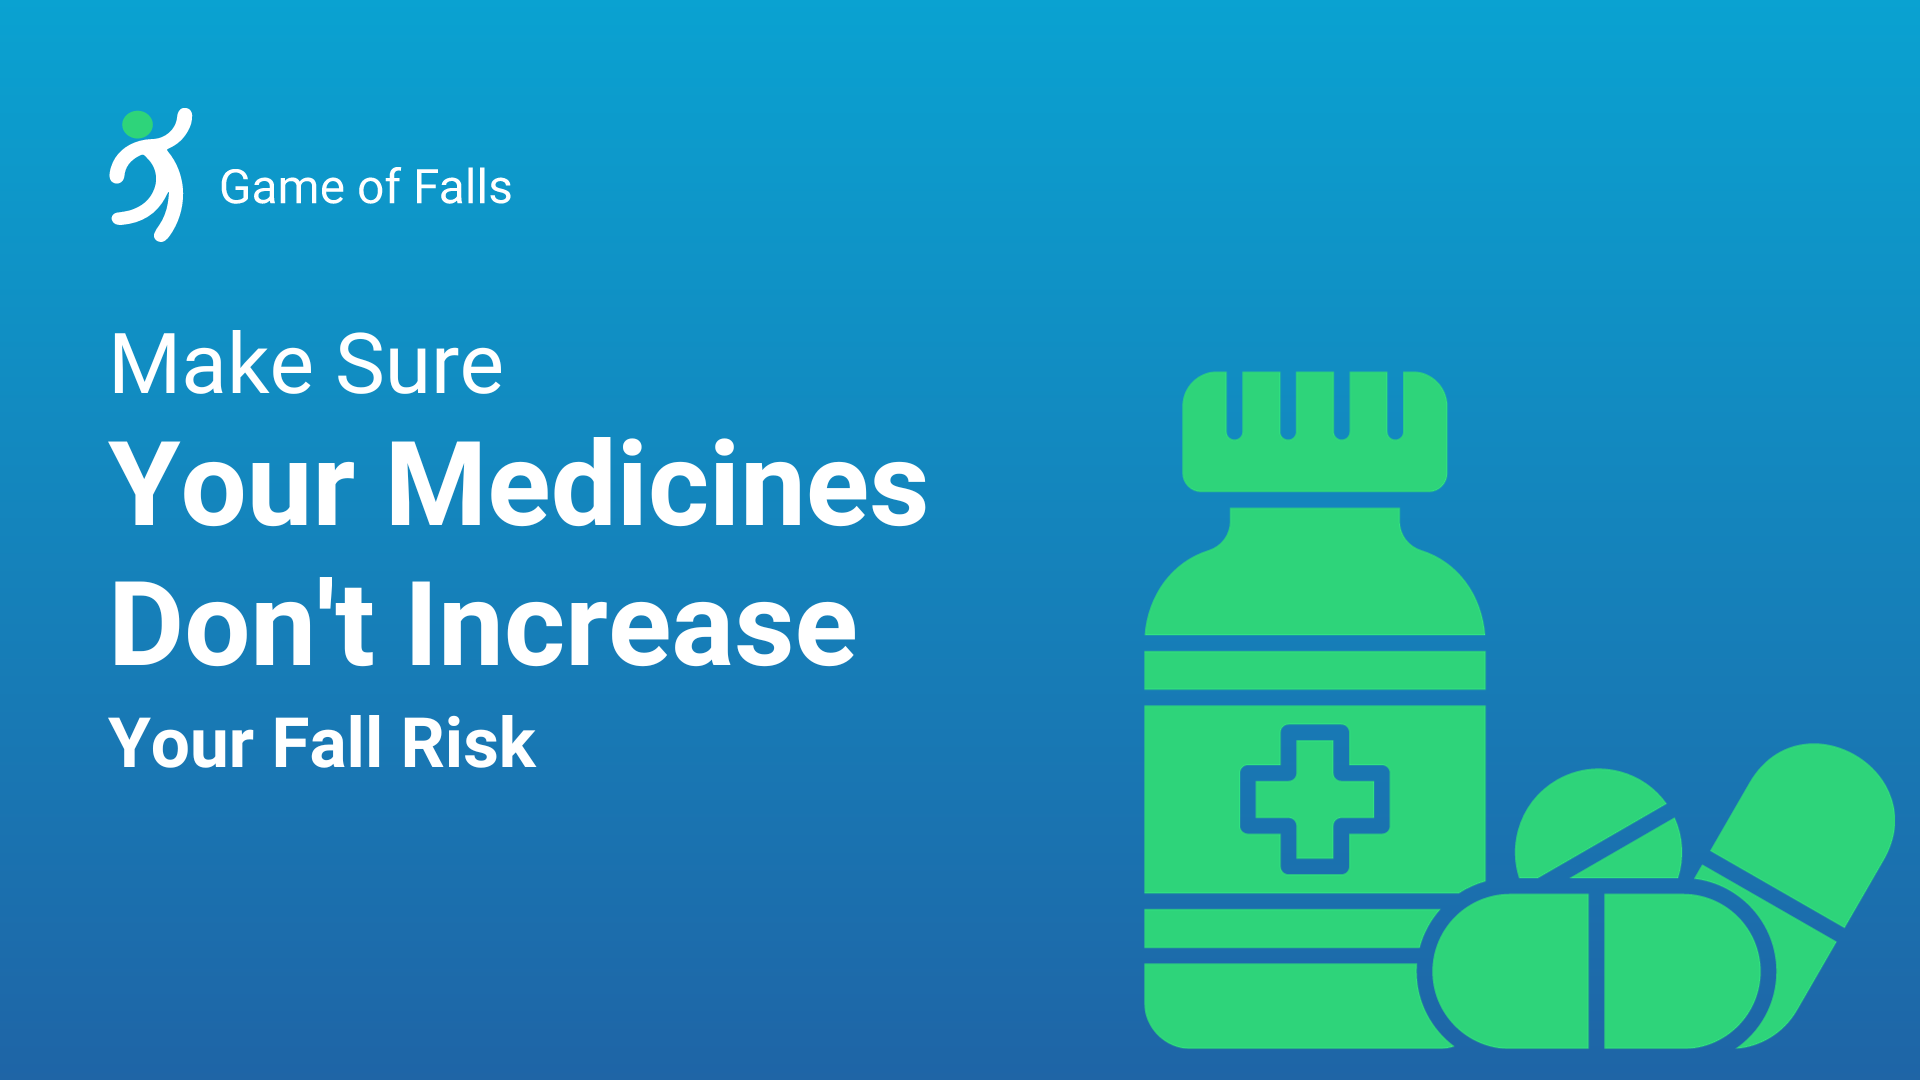 Make sure your medicines don't increase your fall risk